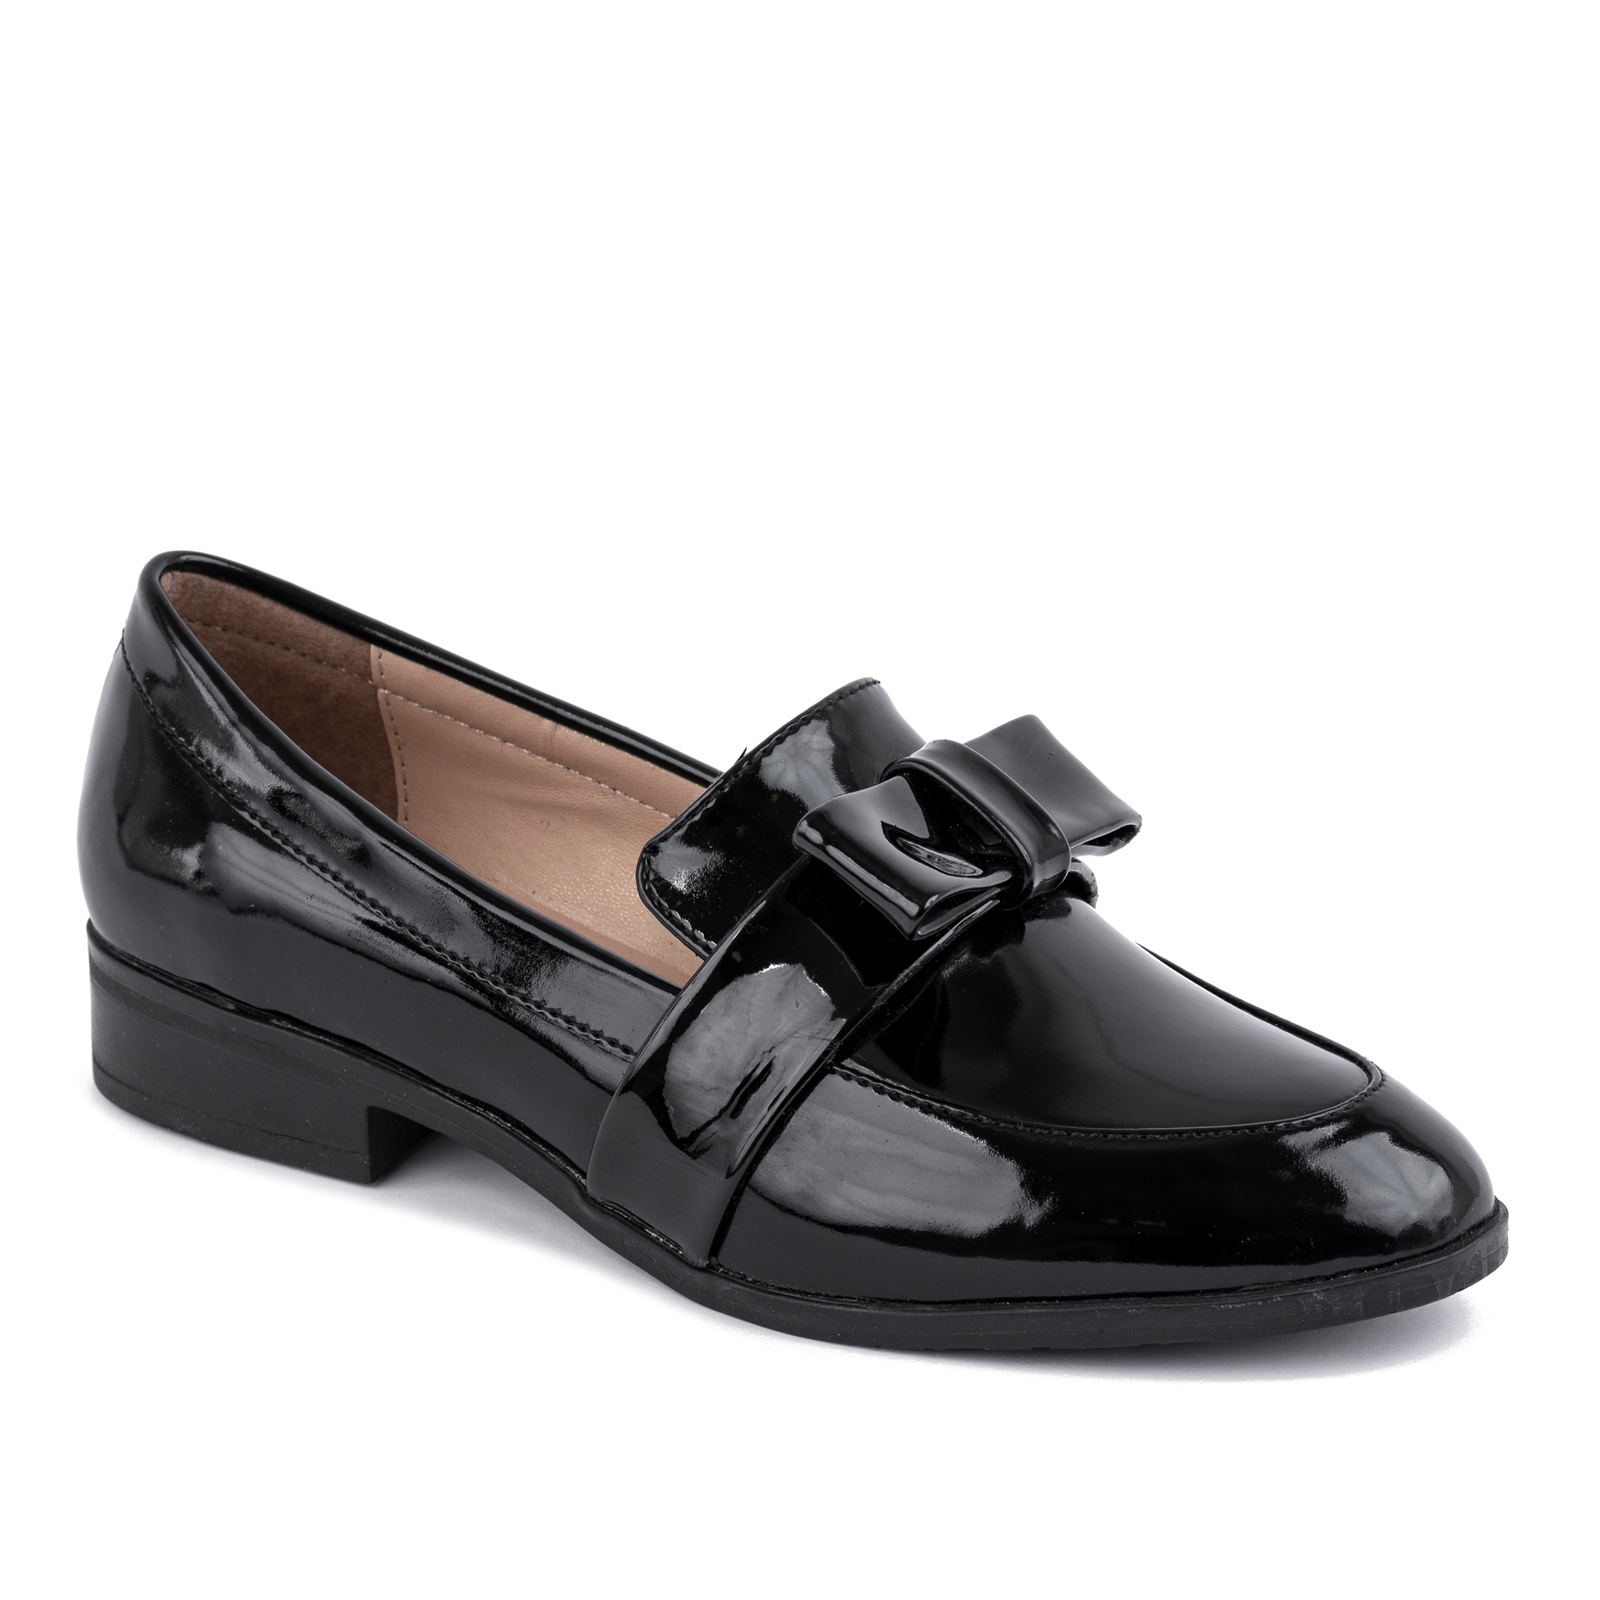 PATENT SHOES WITH BOW - BLACK